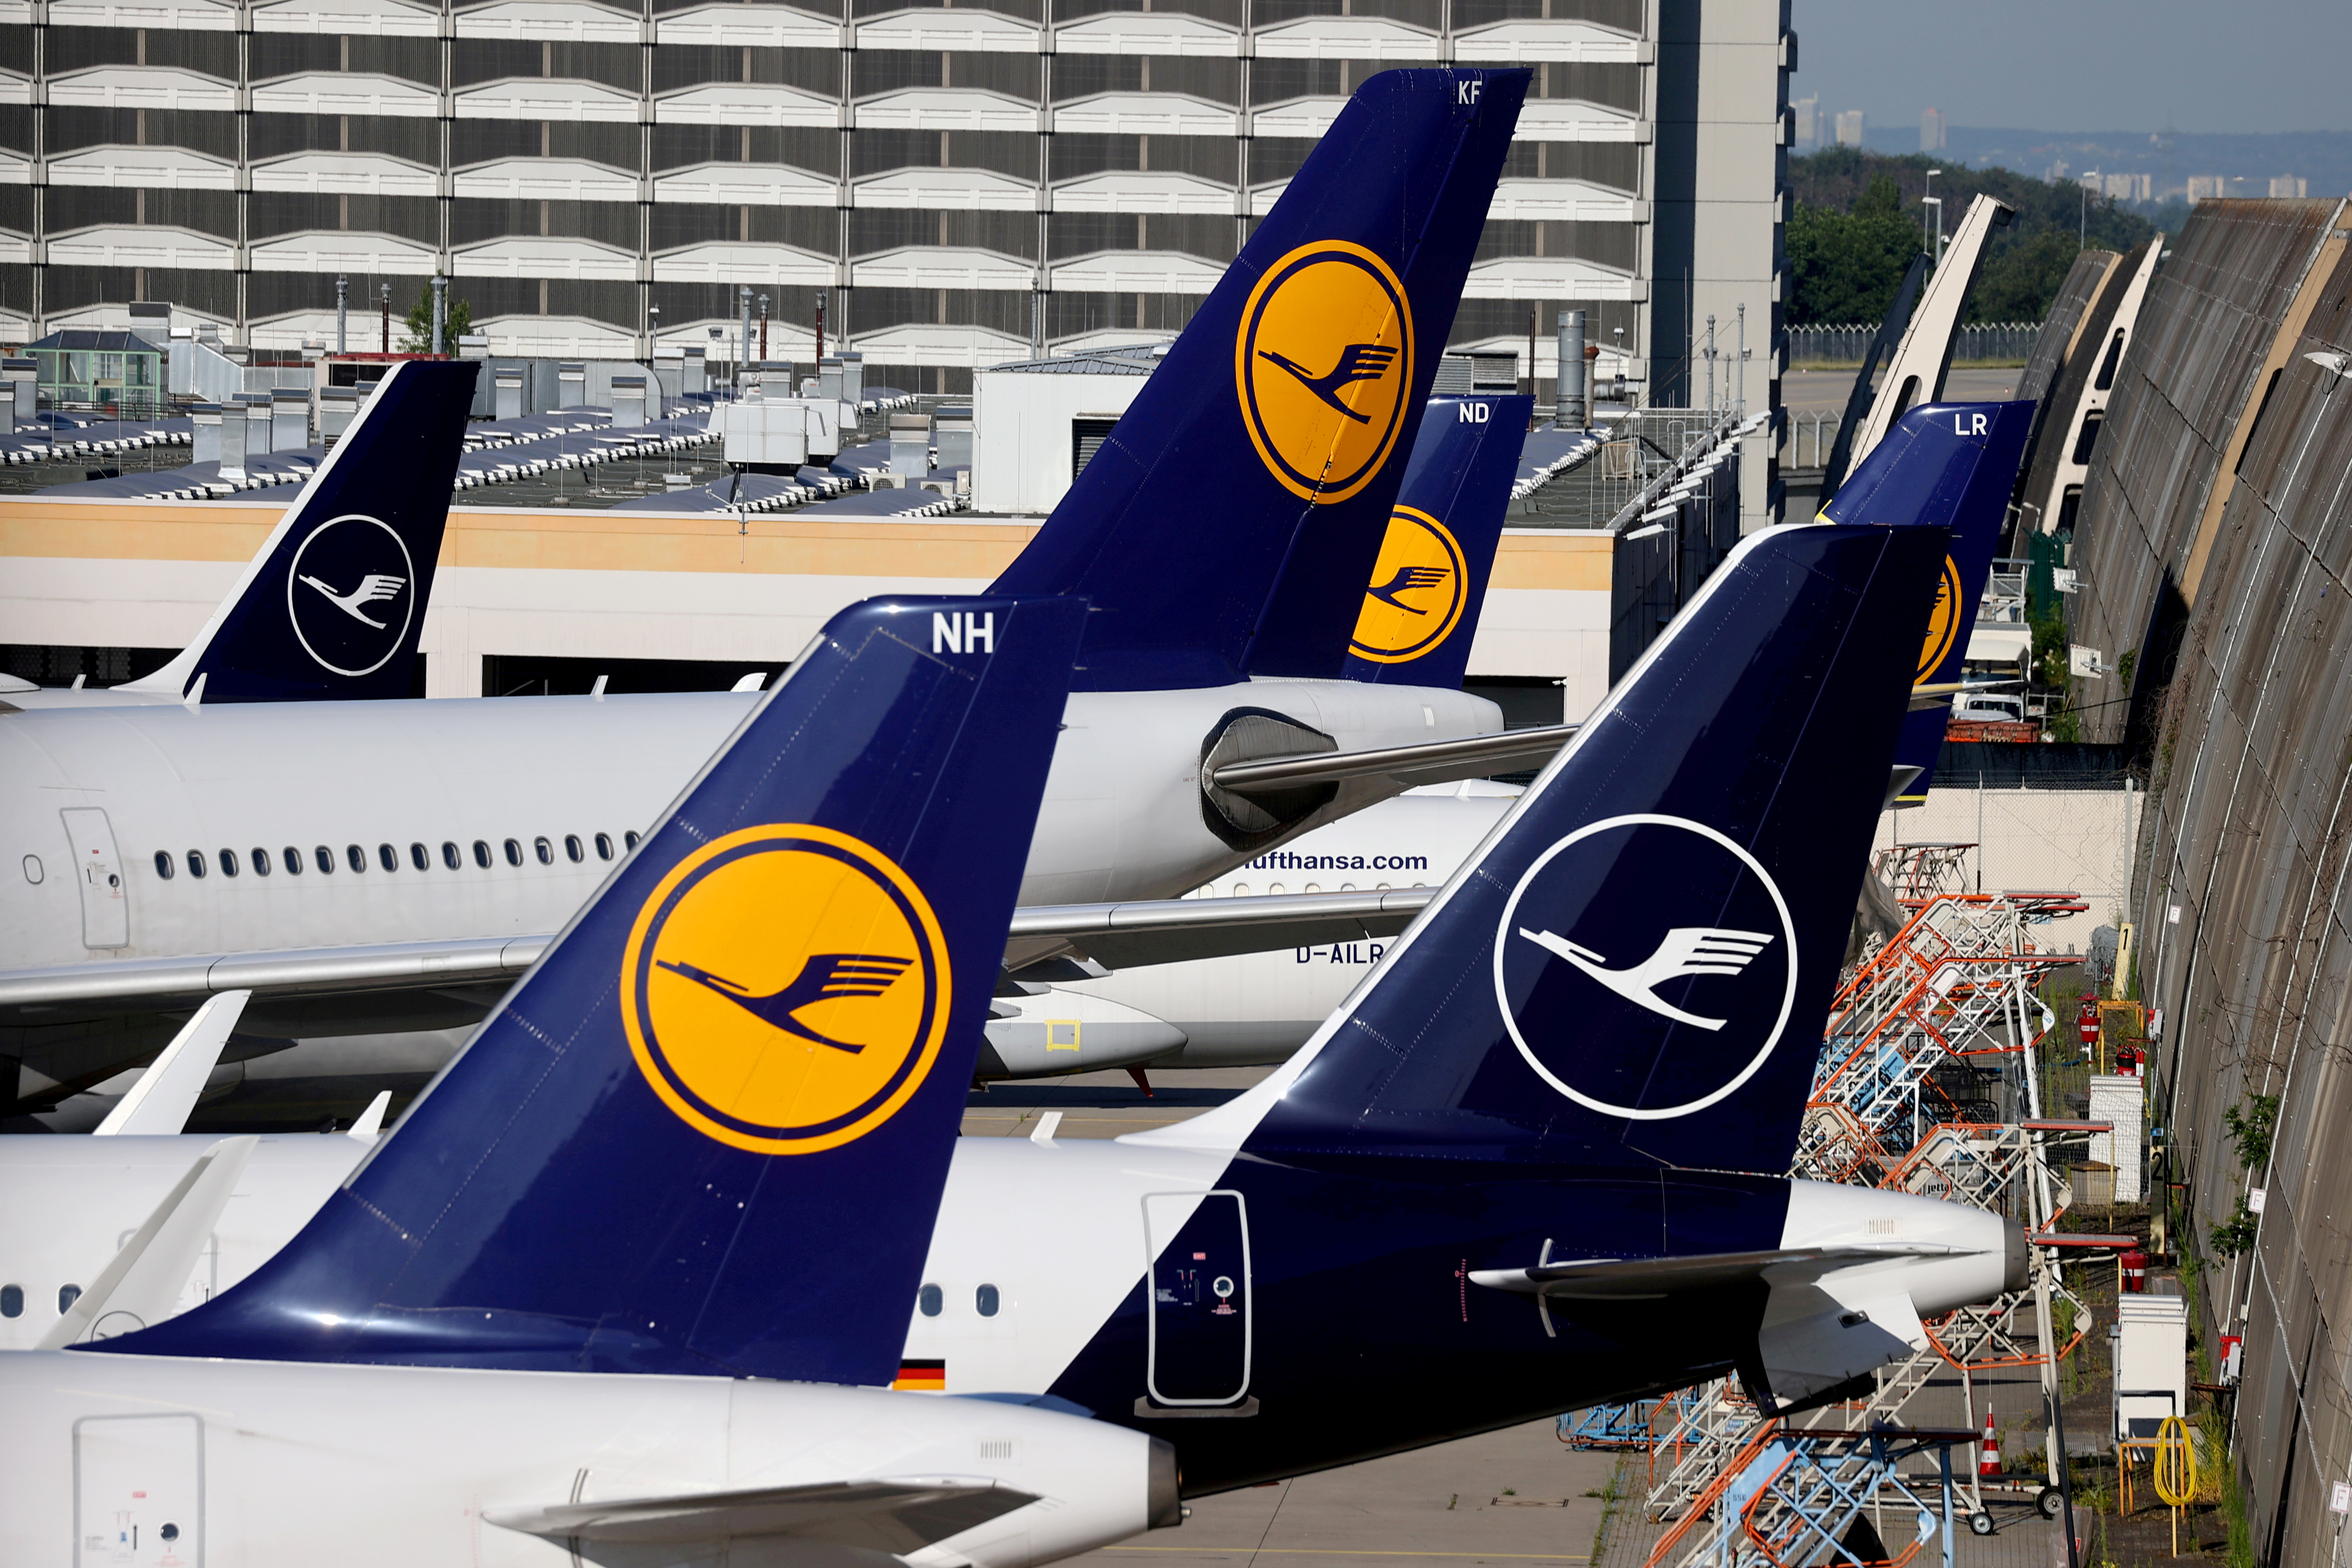 Lufthansa rejects Condor allegations of market position abuse | Reuters